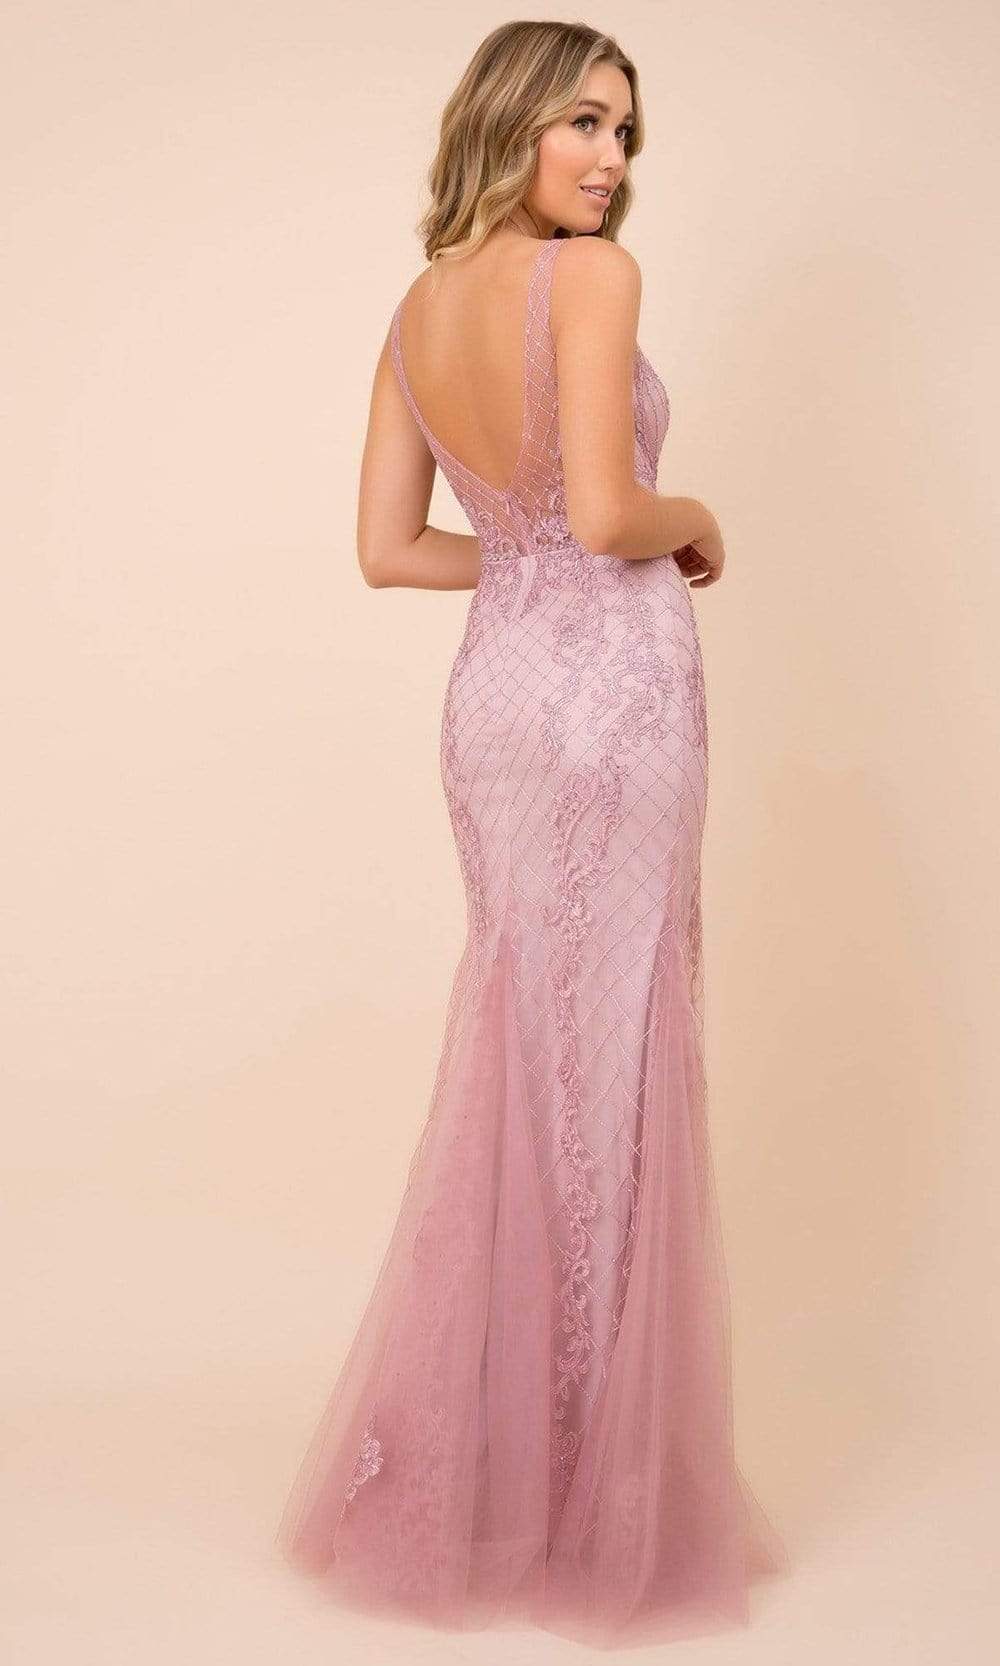 Nox Anabel - A398 Sleeveless V Neck Beaded Lace Applique Trumpet Gown Evening Dresses